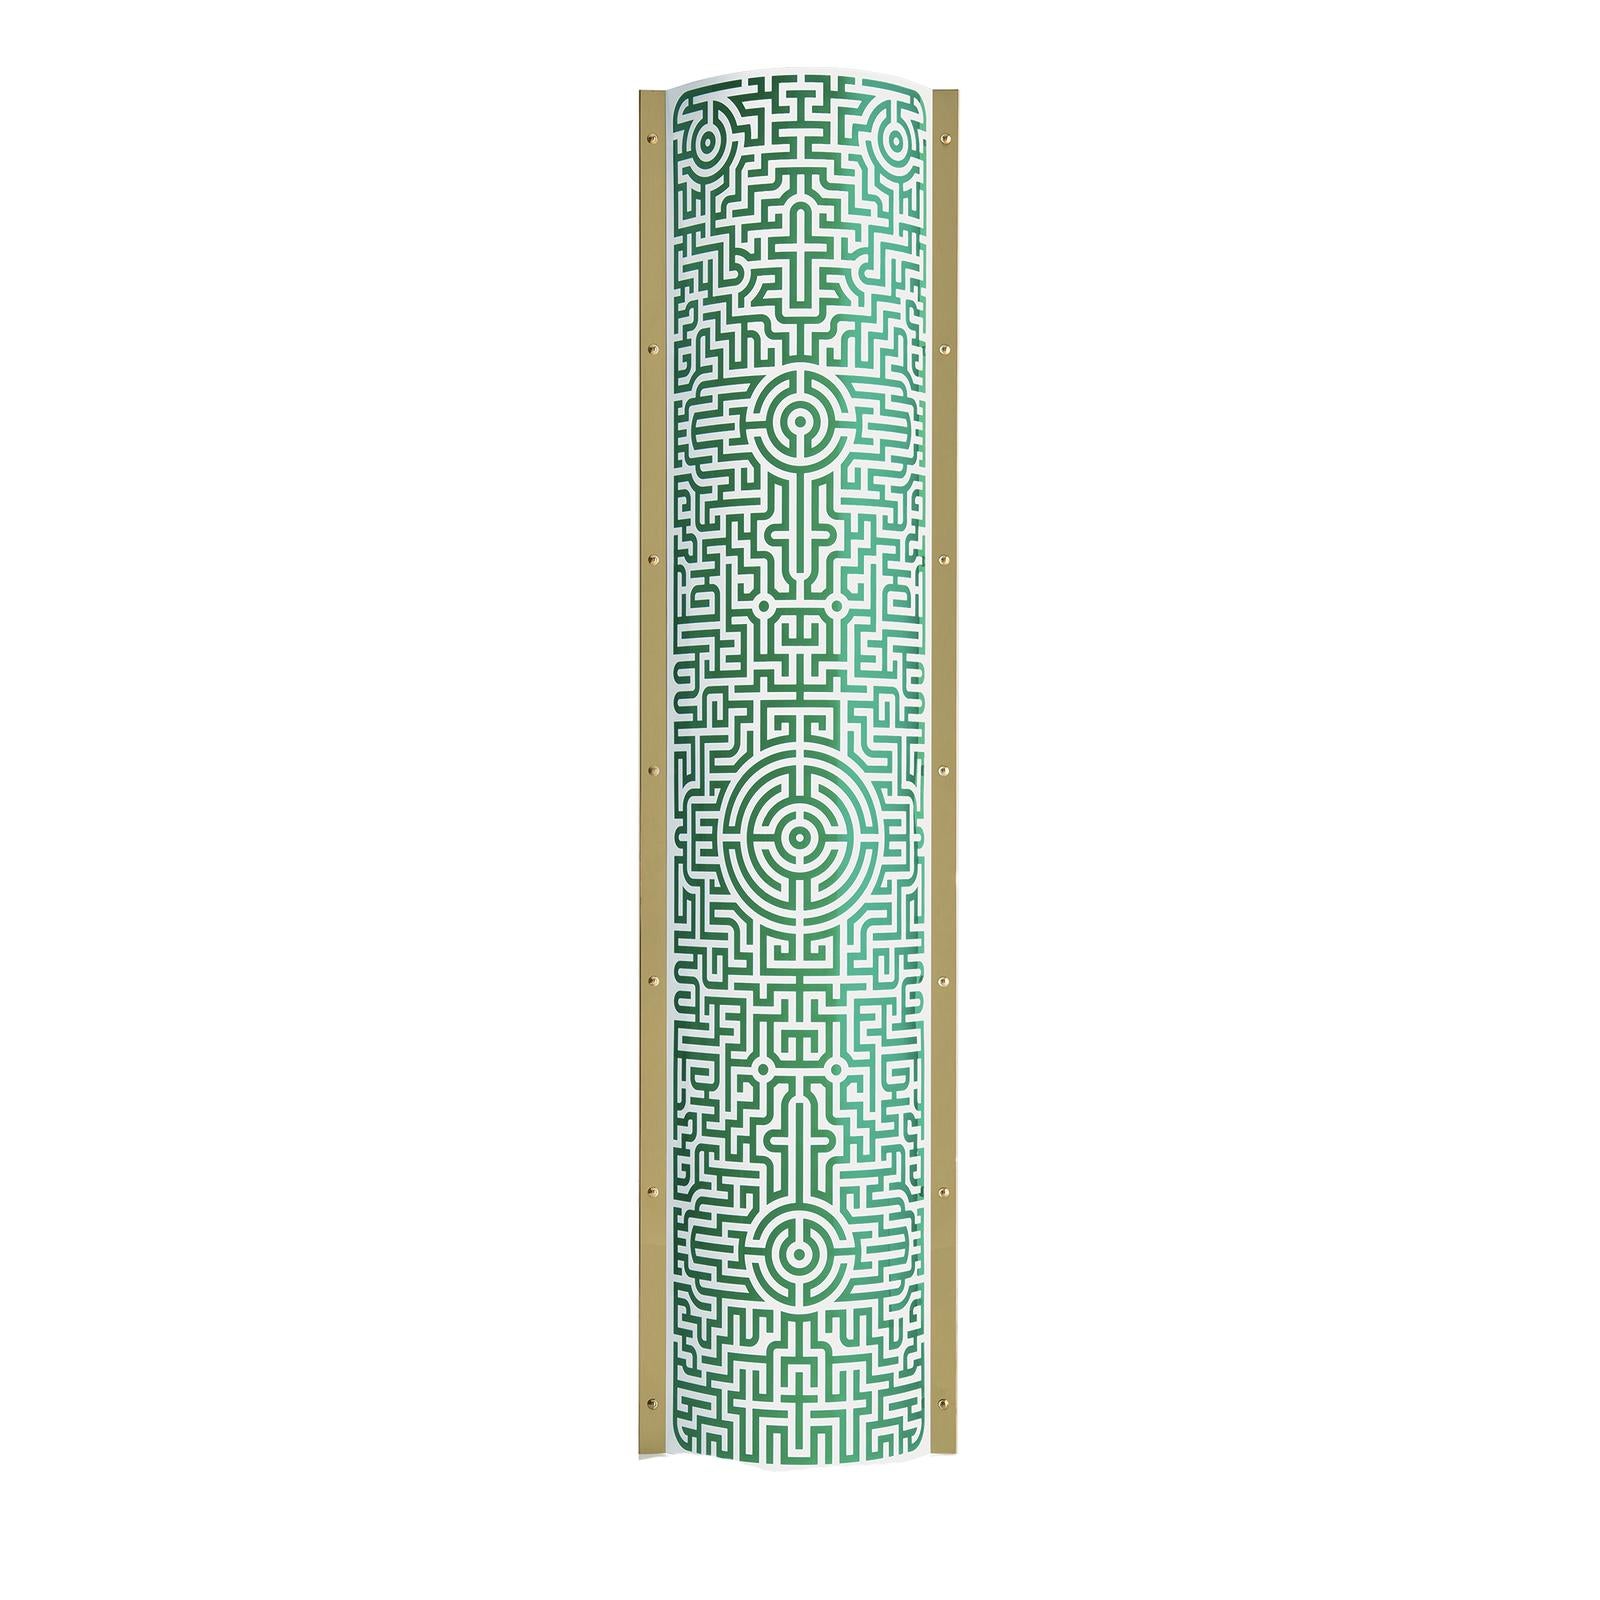 This exquisite floor lamp is part of the Lighting Archives, designed by Studio Job. Its elegant silhouette, crafted of engineered plastic, is adorned with a distinctive pattern that creates a maze-like motif in turquoise, adding character to a